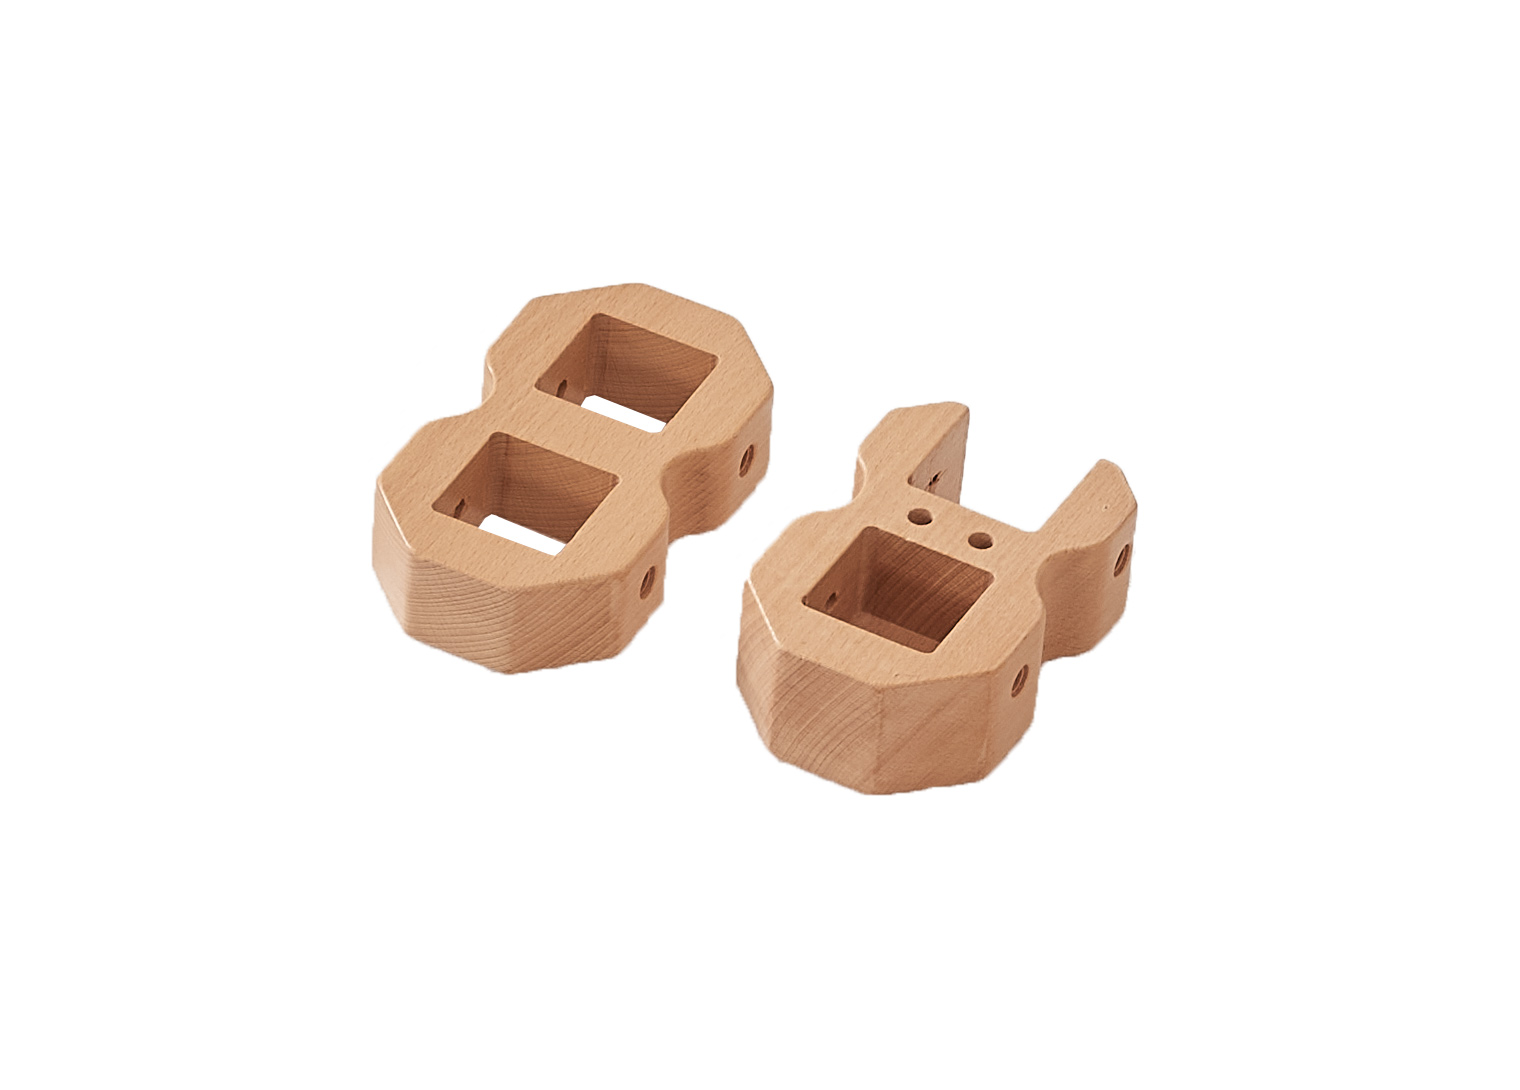 Type II Connector 2-Piece Set - 2 Panels of Different Heights at 90°/180° Inner Angle